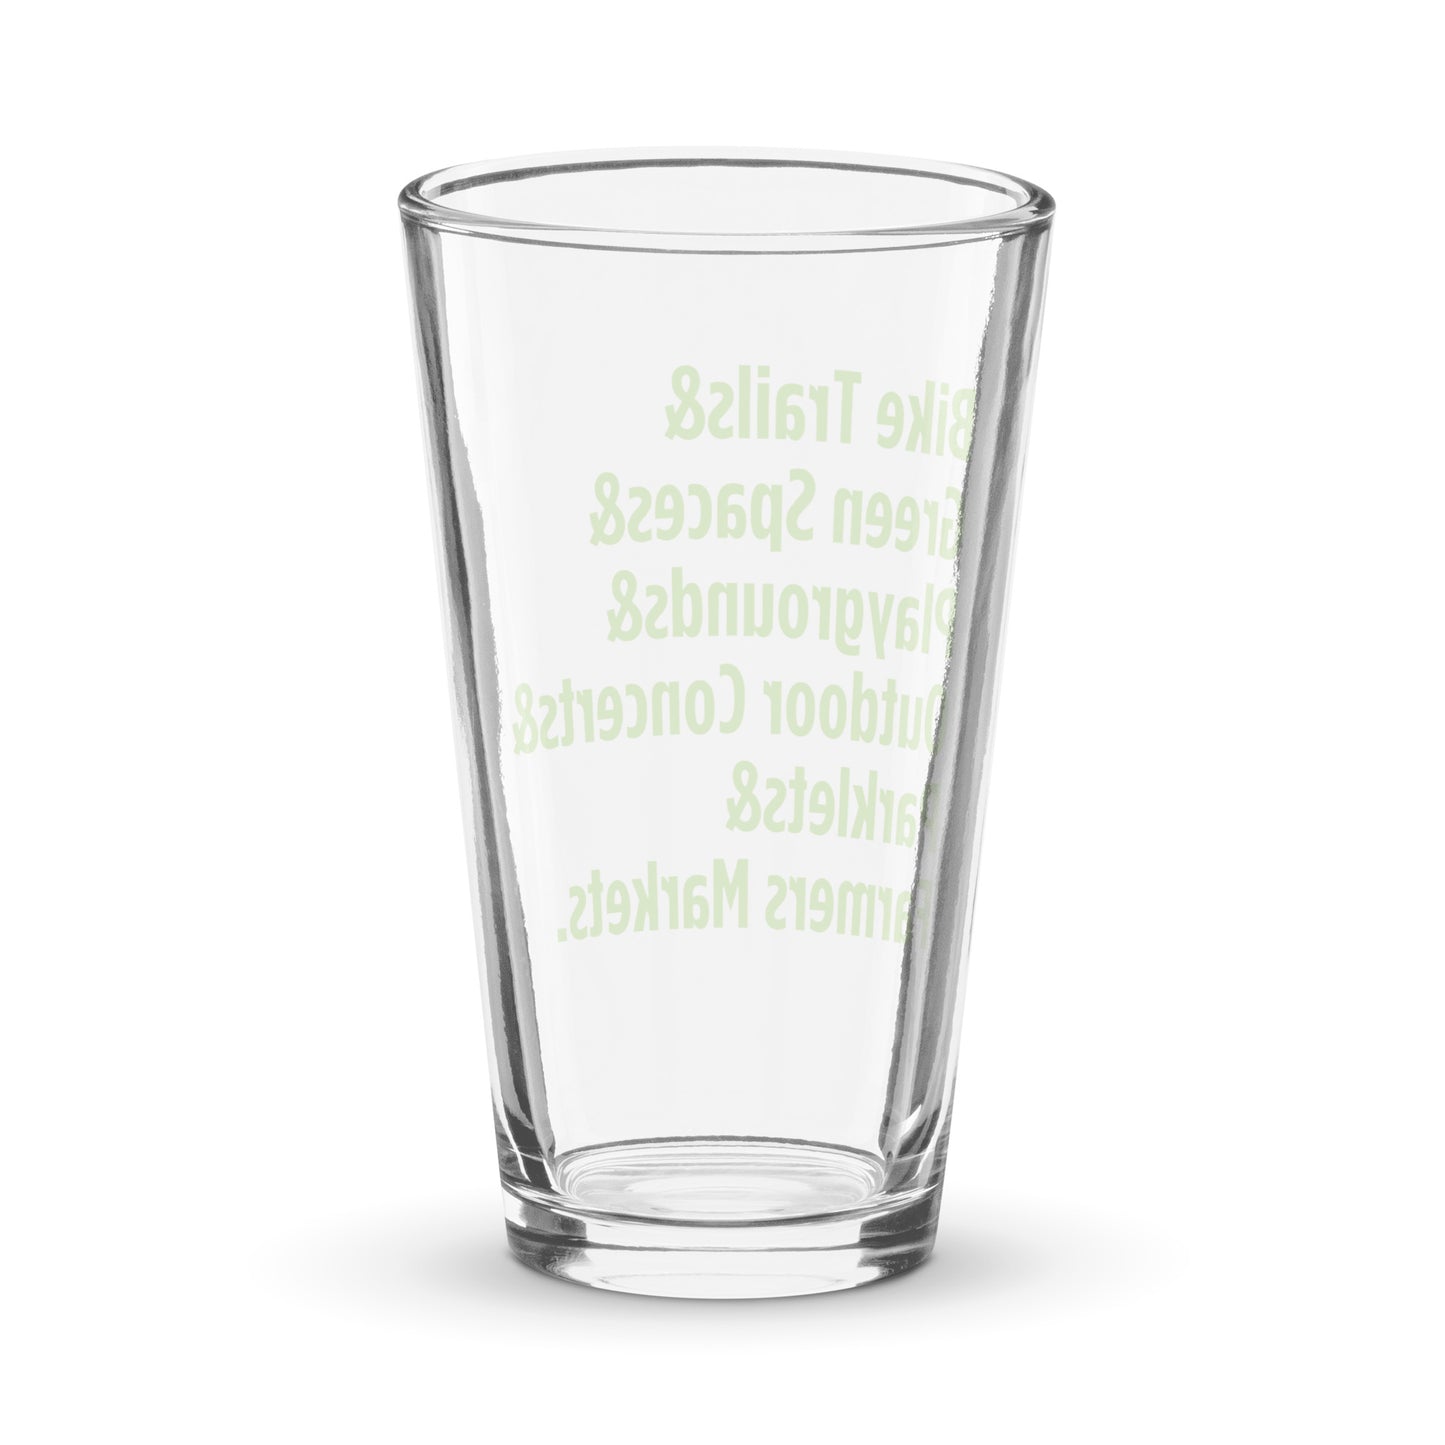 "Only on Main Street" (Greenspaces) Shaker Pint Glass